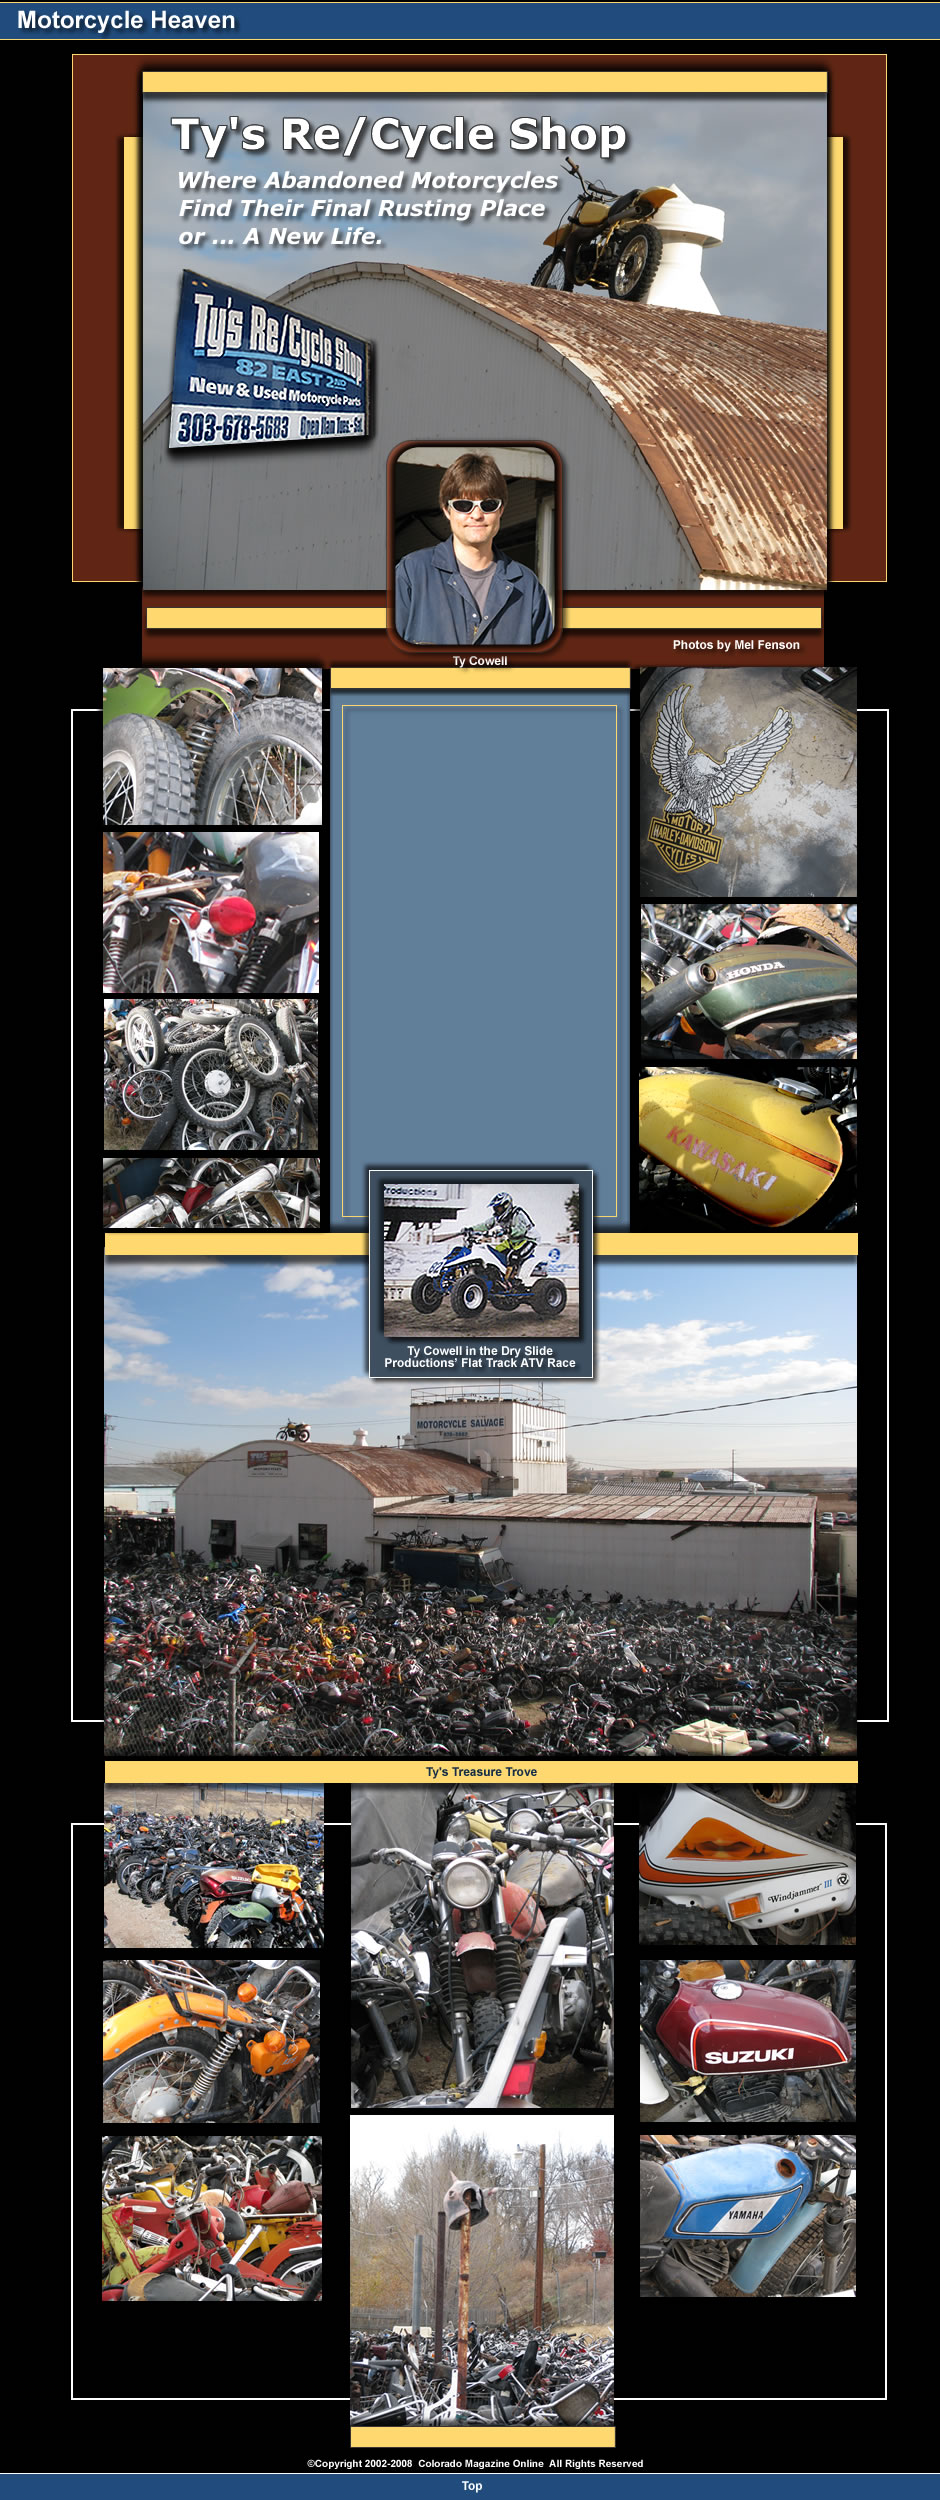 Business plan motorcycle salvage